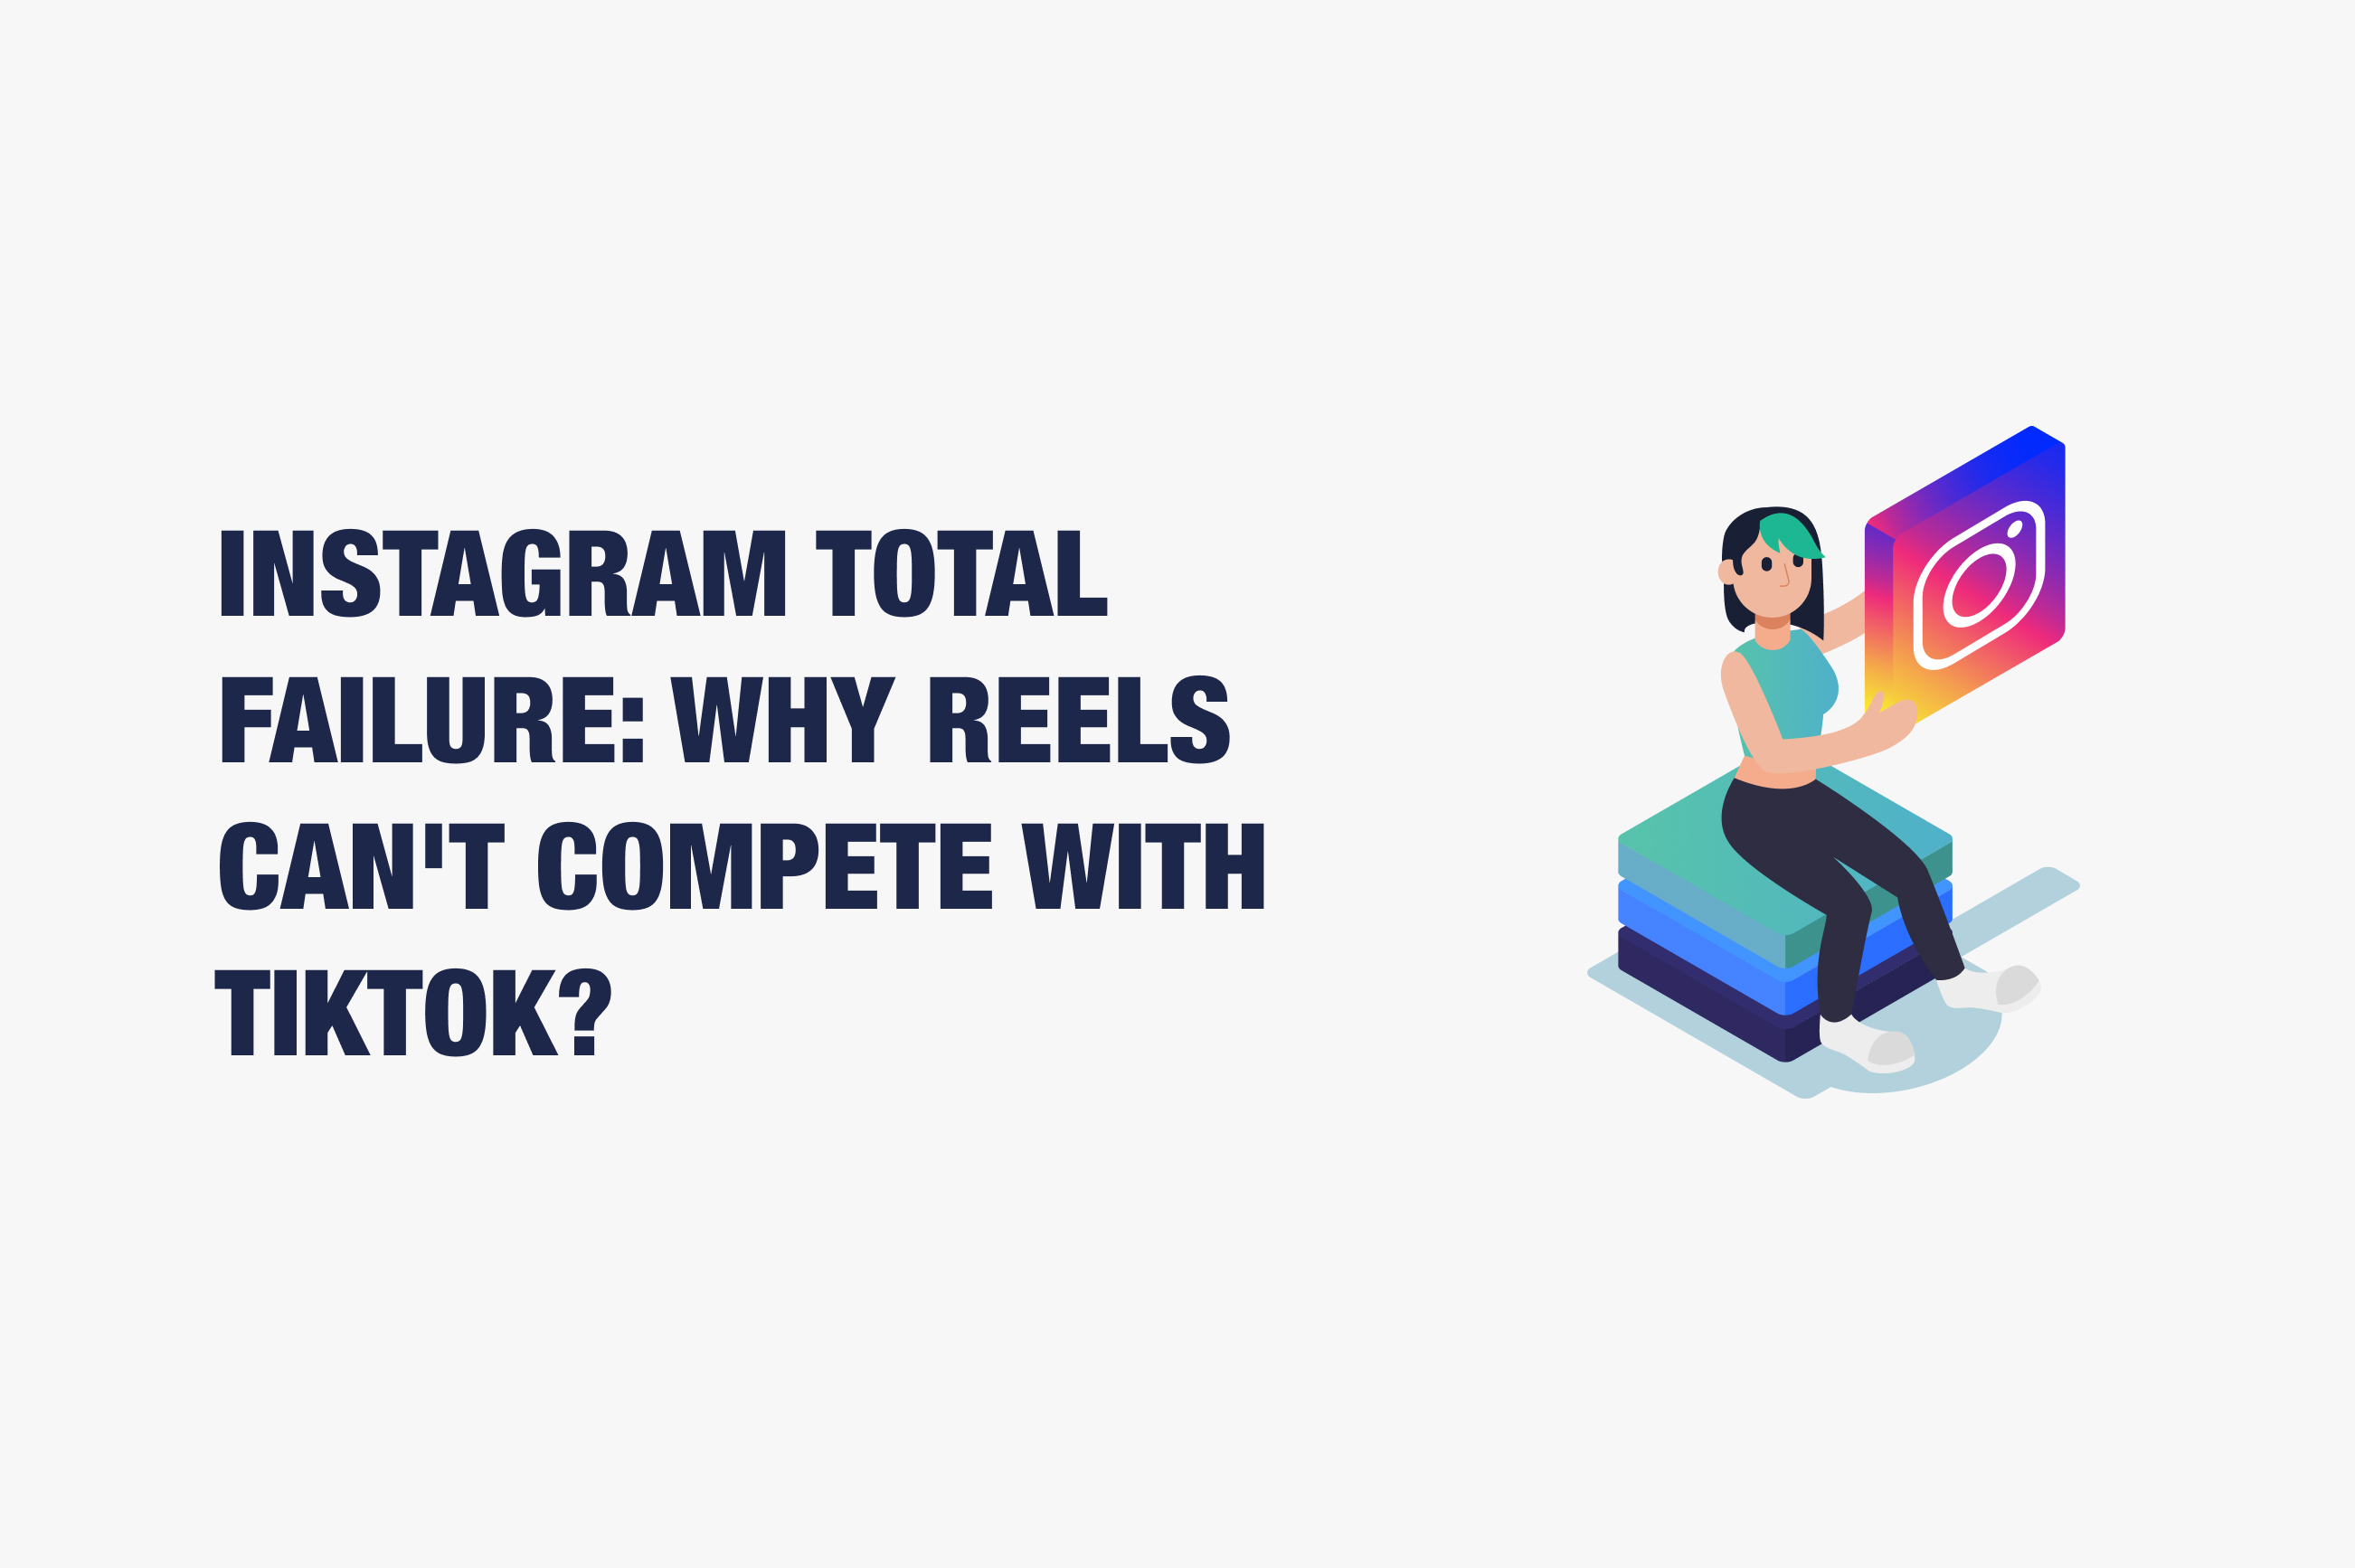 Instagram Total Failure: Why Reels Can't Compete with TikTok?